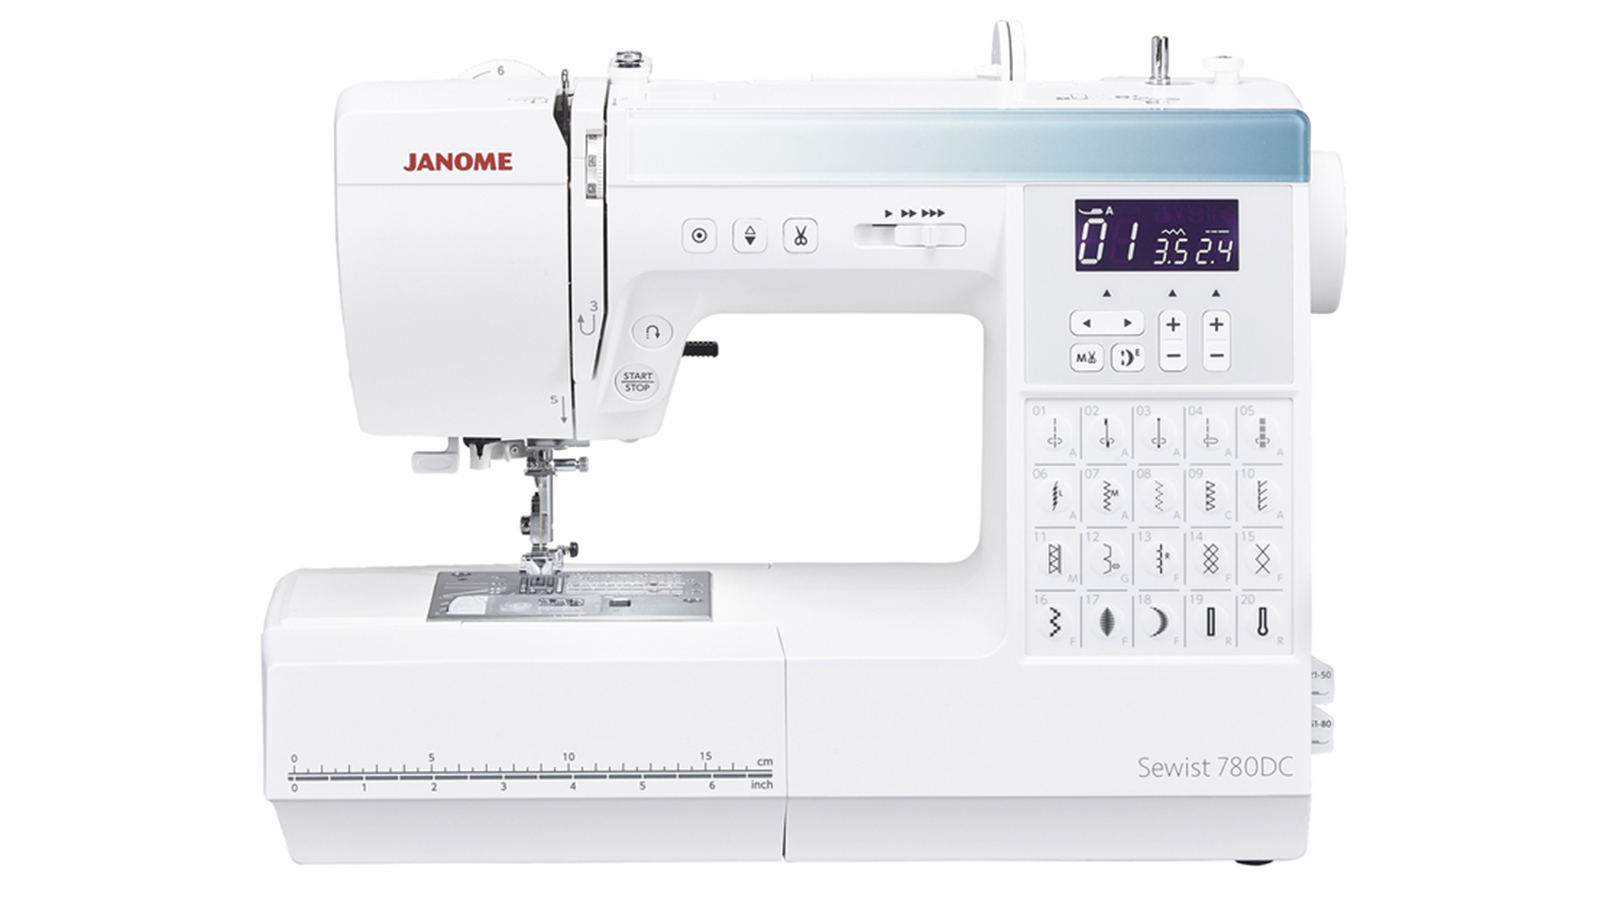 Janome Sewist 780DC sewing machine: easy to use, simple design, and great for sewers across levels of expertise